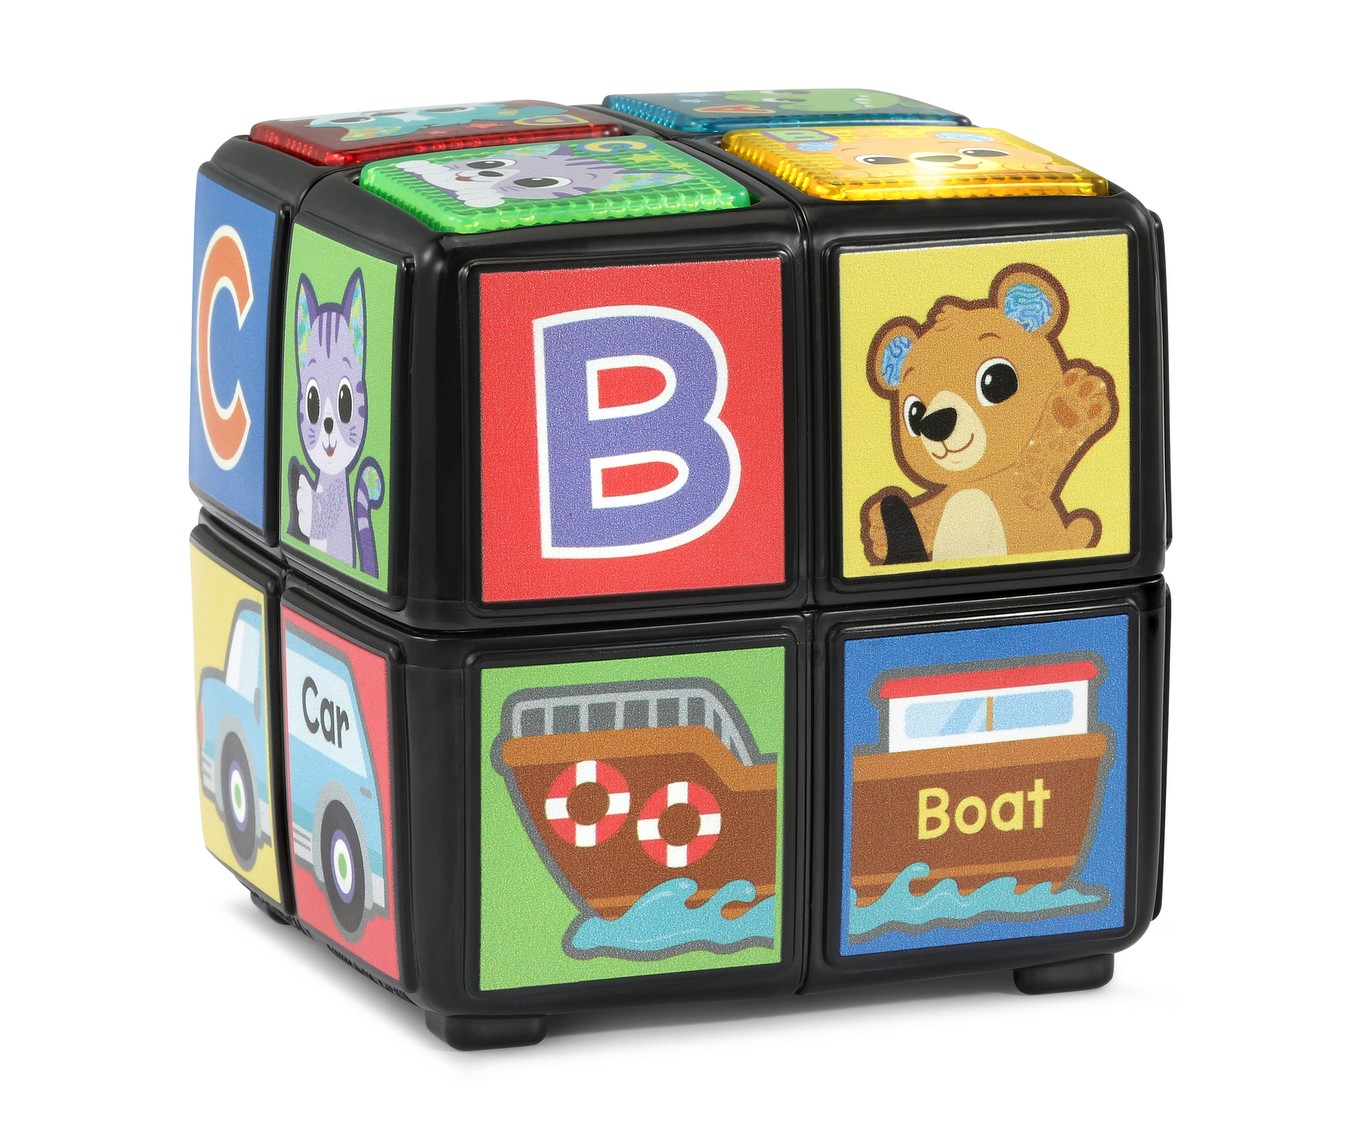 There are more options here VTech® Twist & Teach Animal Cube